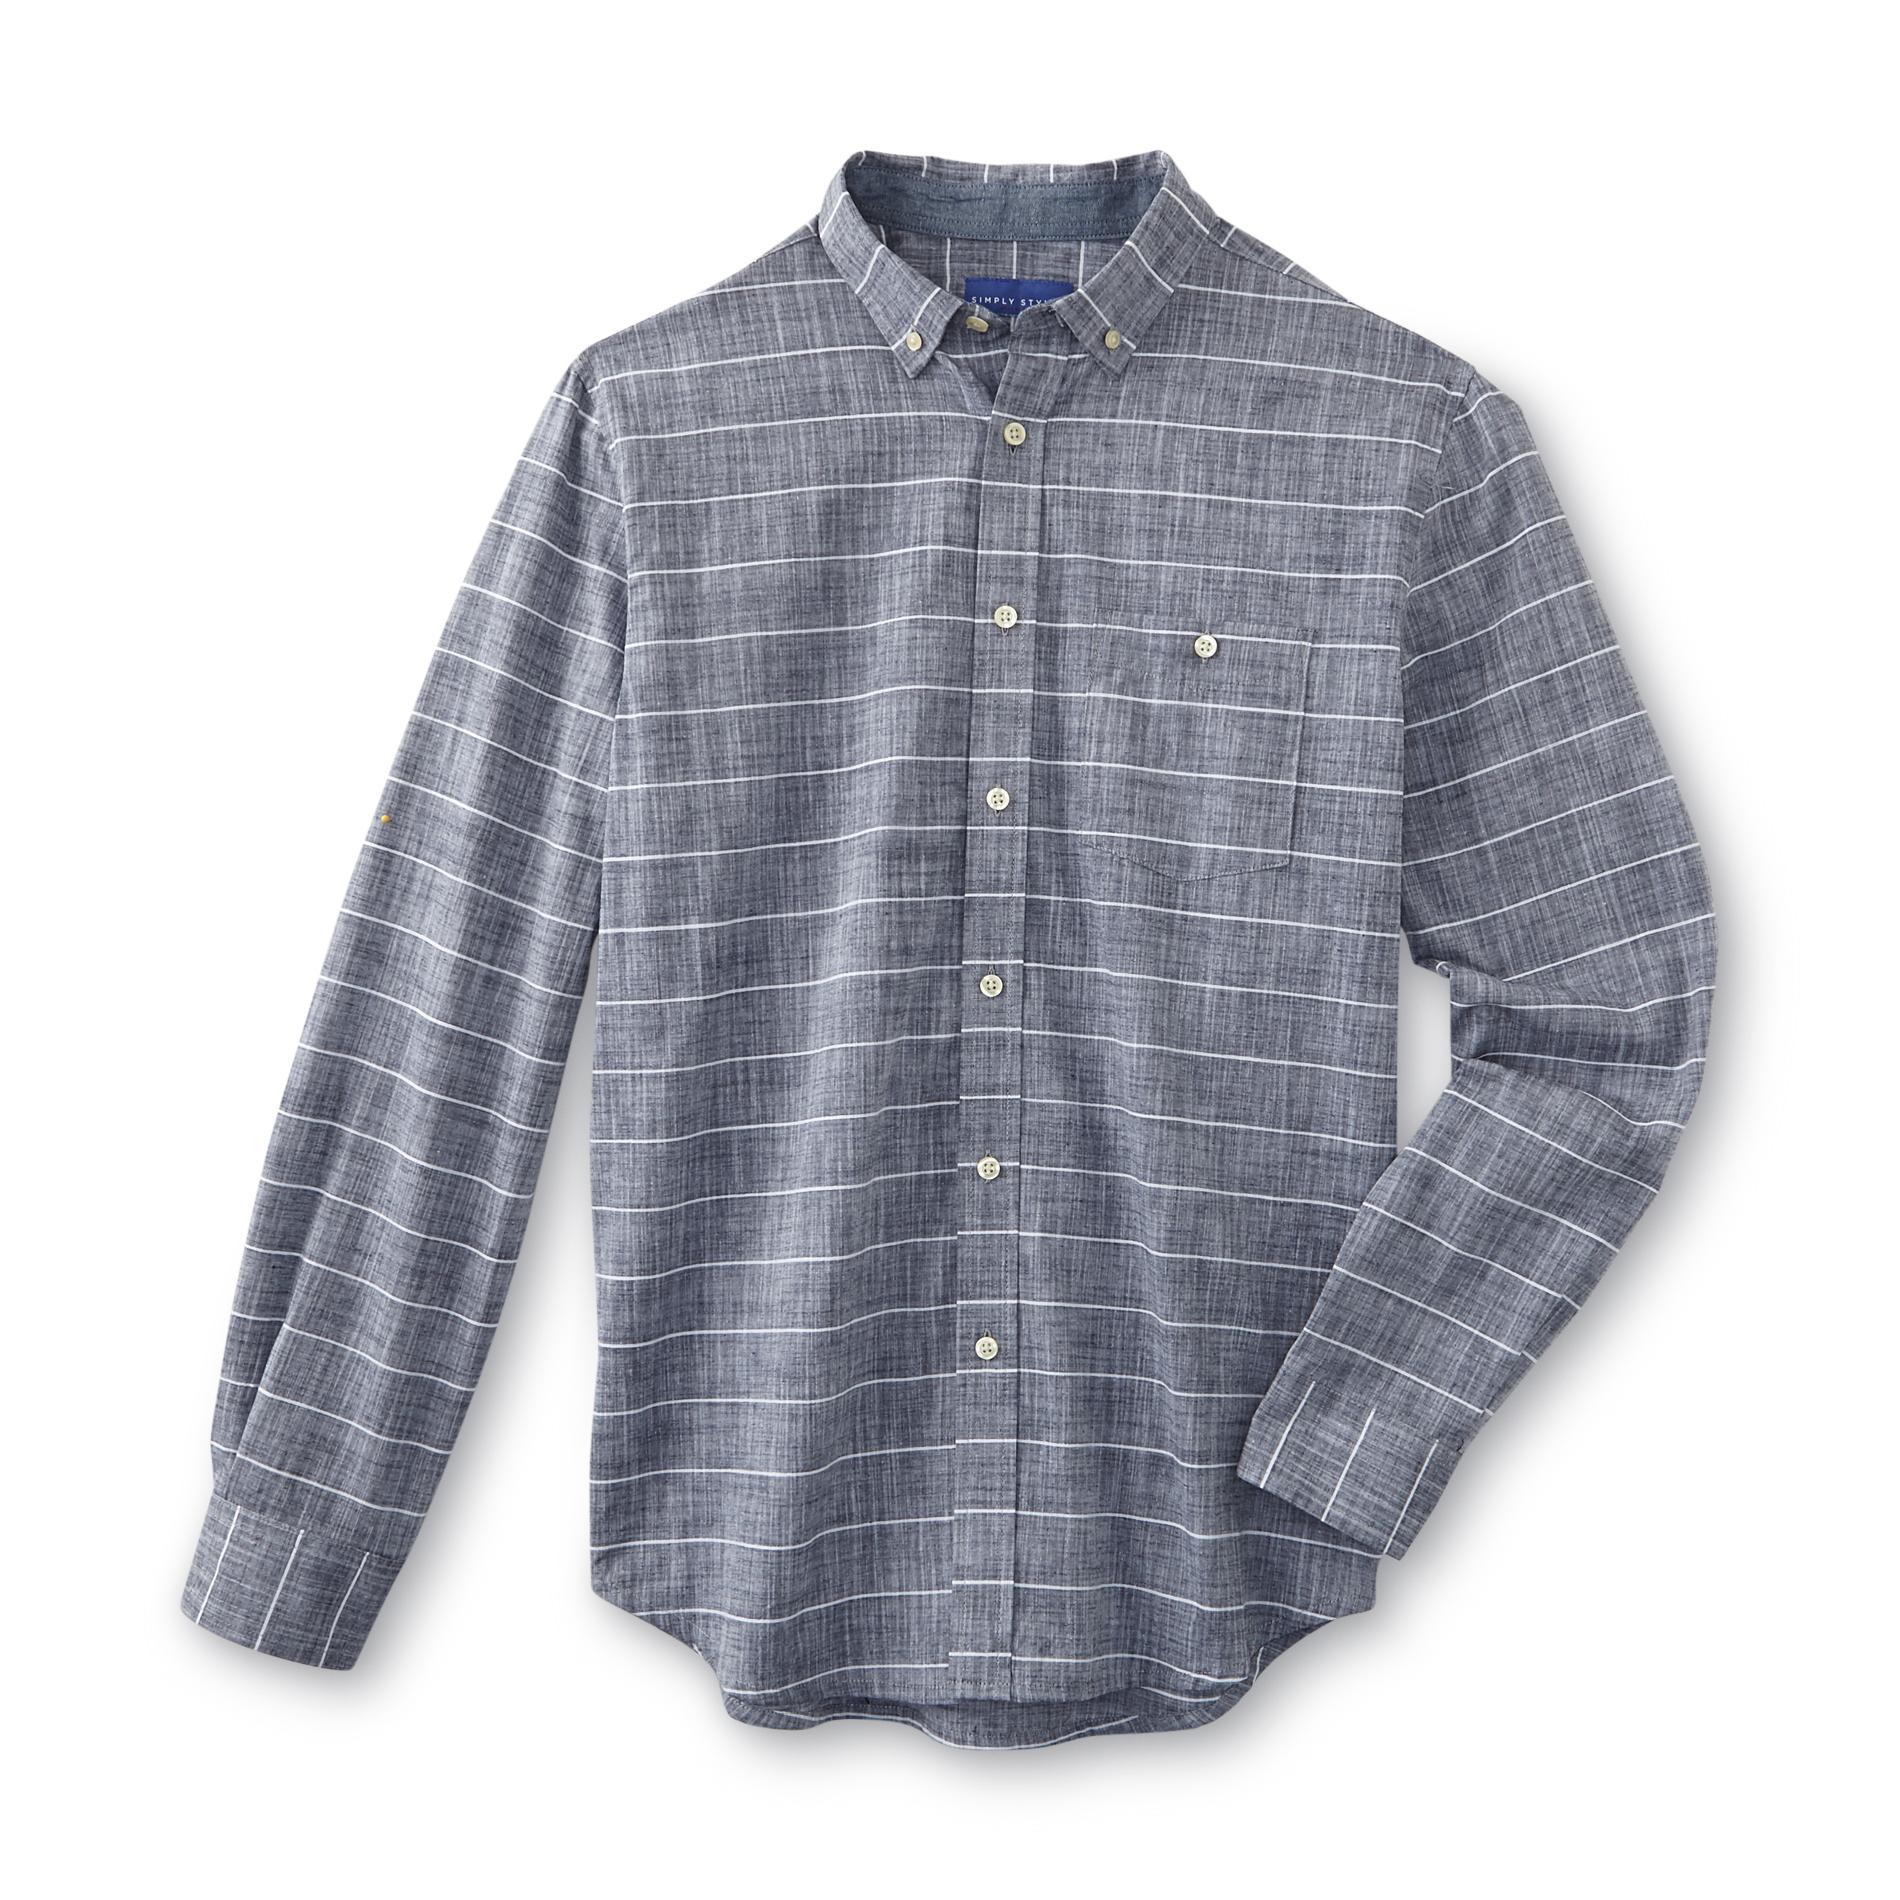 Simply Styled Men's Chambray Shirt - Striped